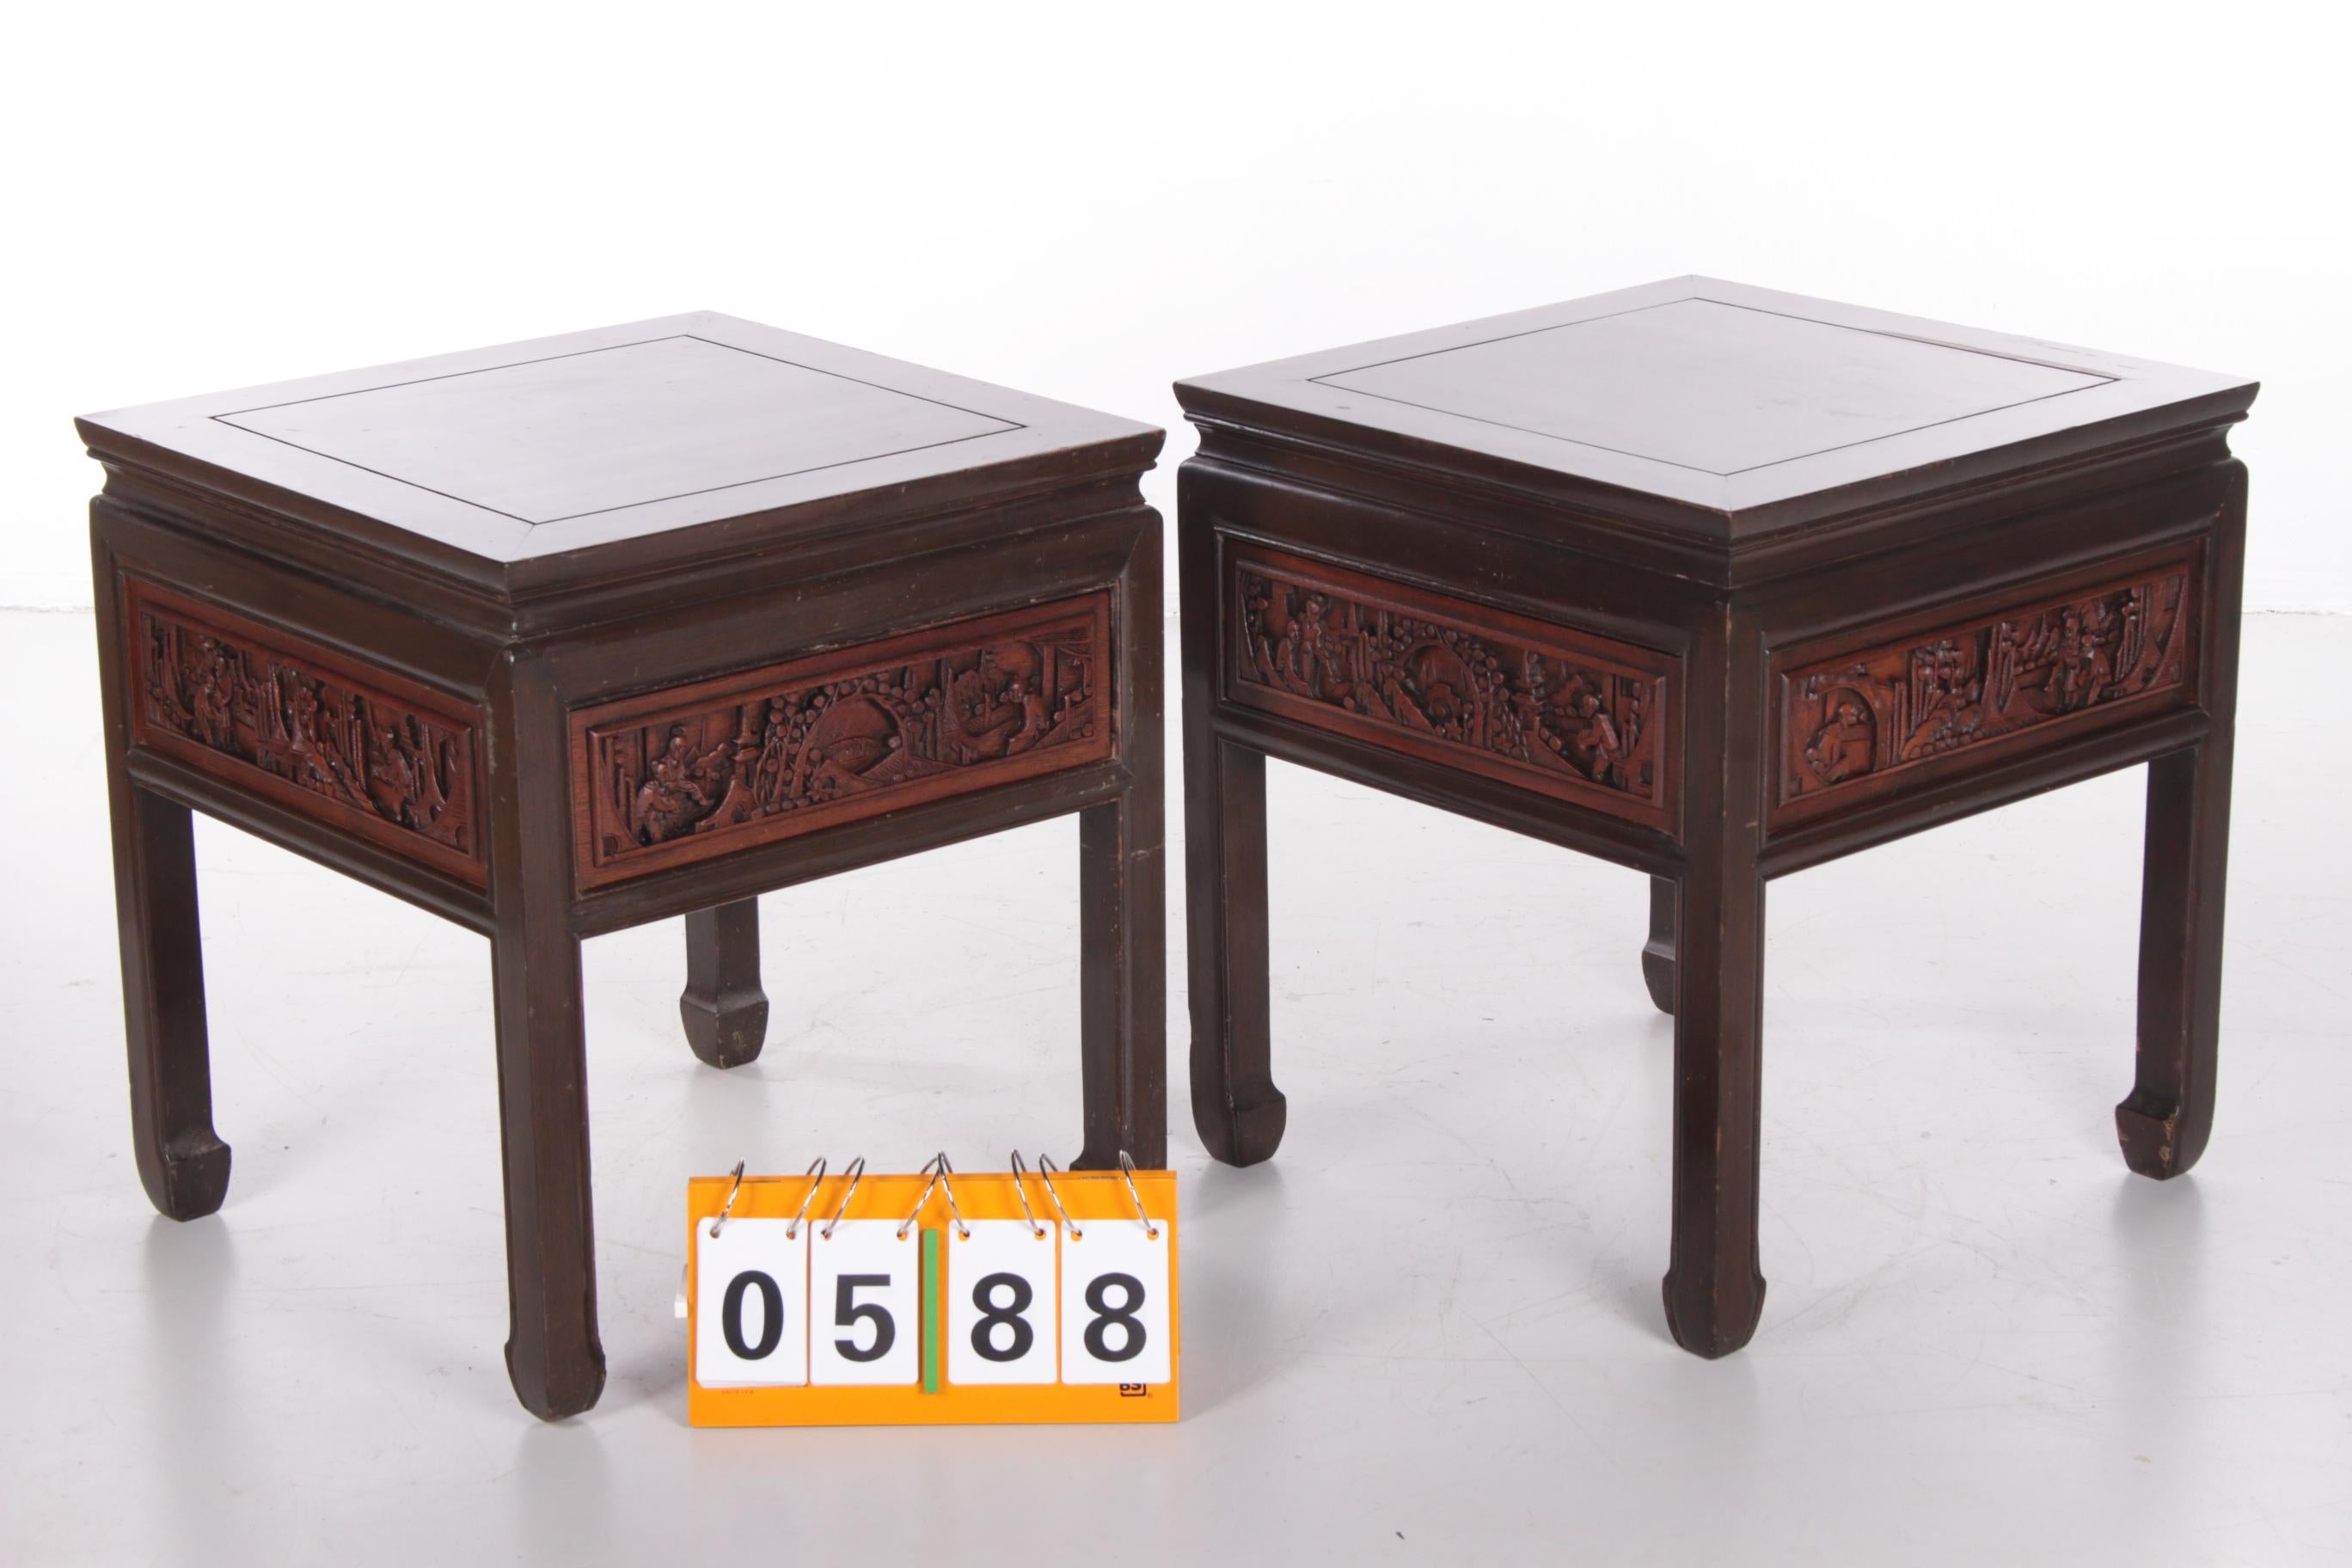 20th Century Chinese Wooden Bedside Tables with Beautiful Hand Carving 11